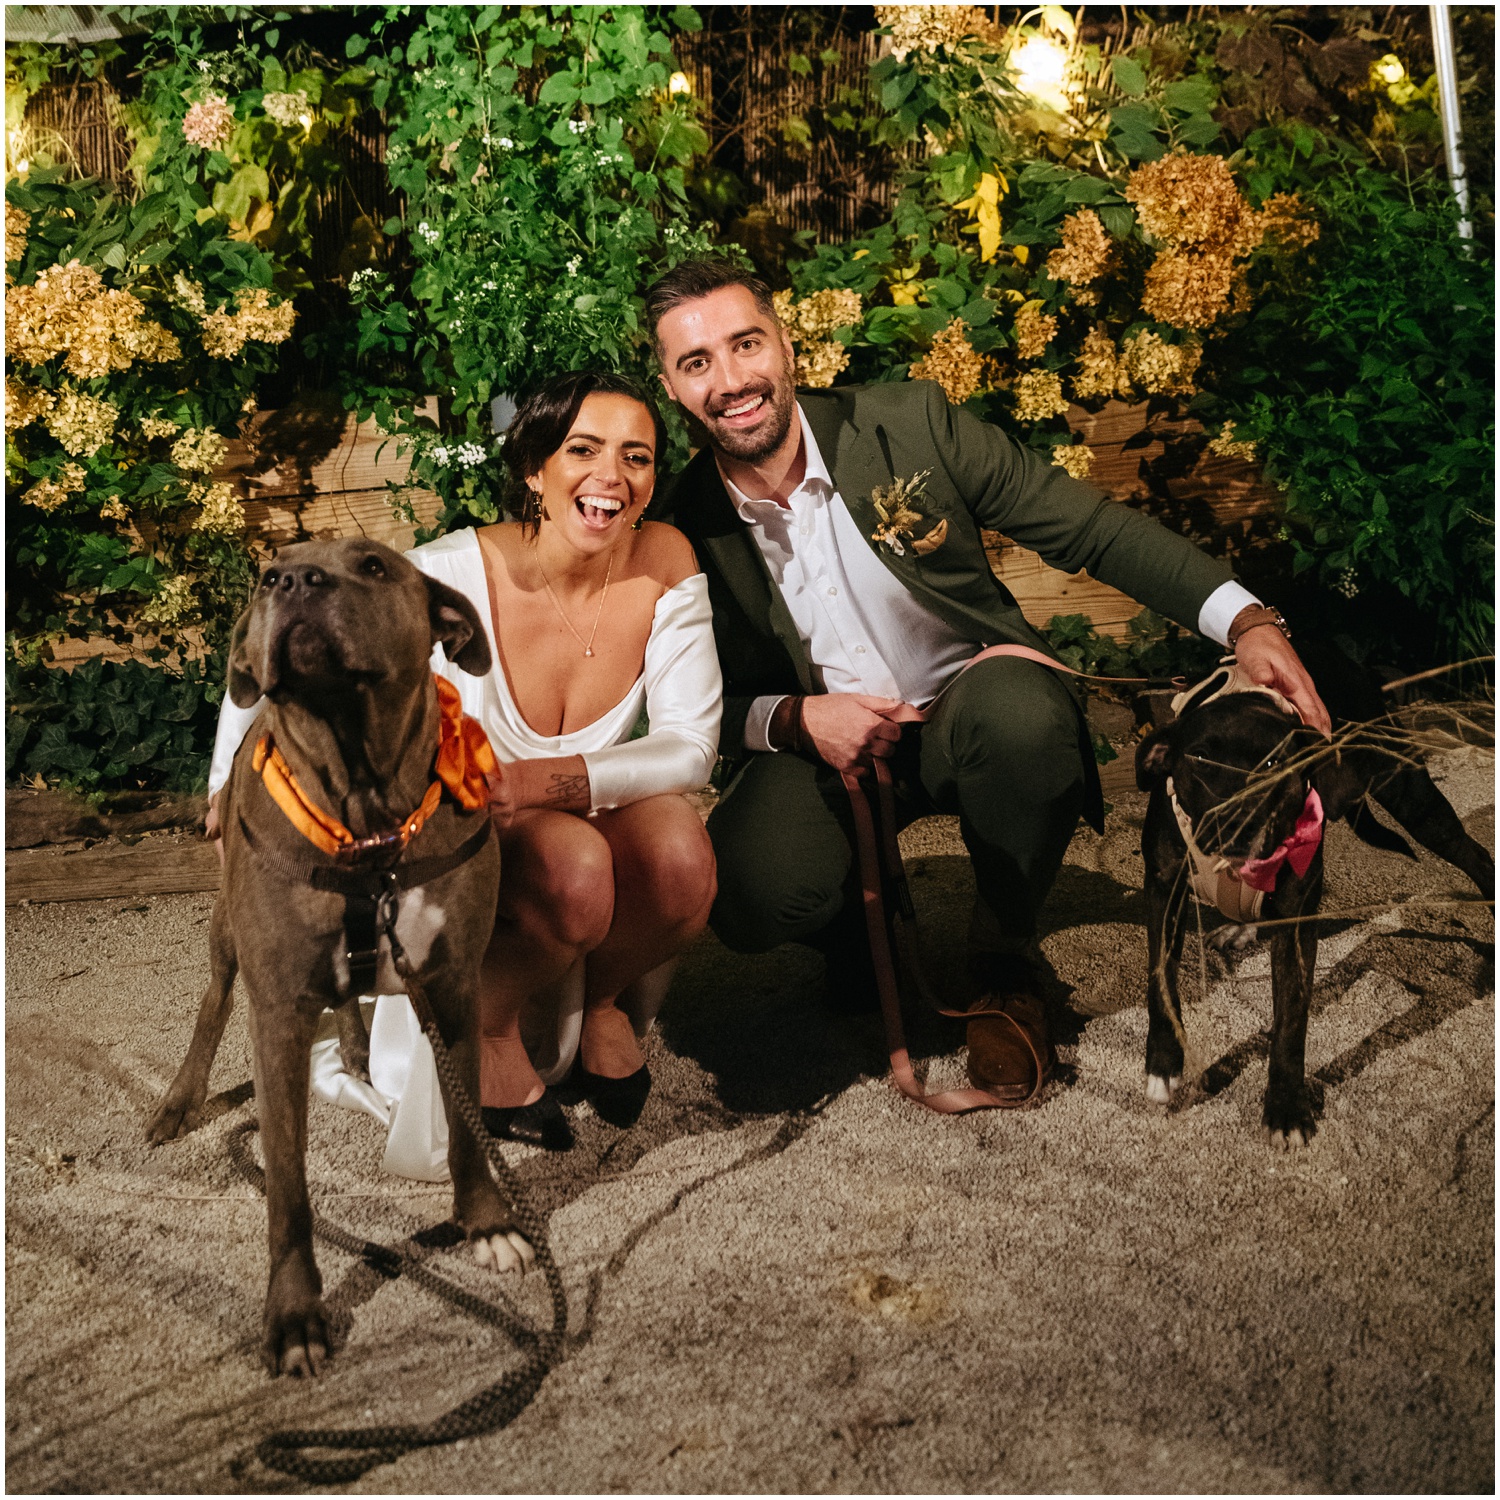 The bride and groom pose with their dogs at their Philadelphia wedding.